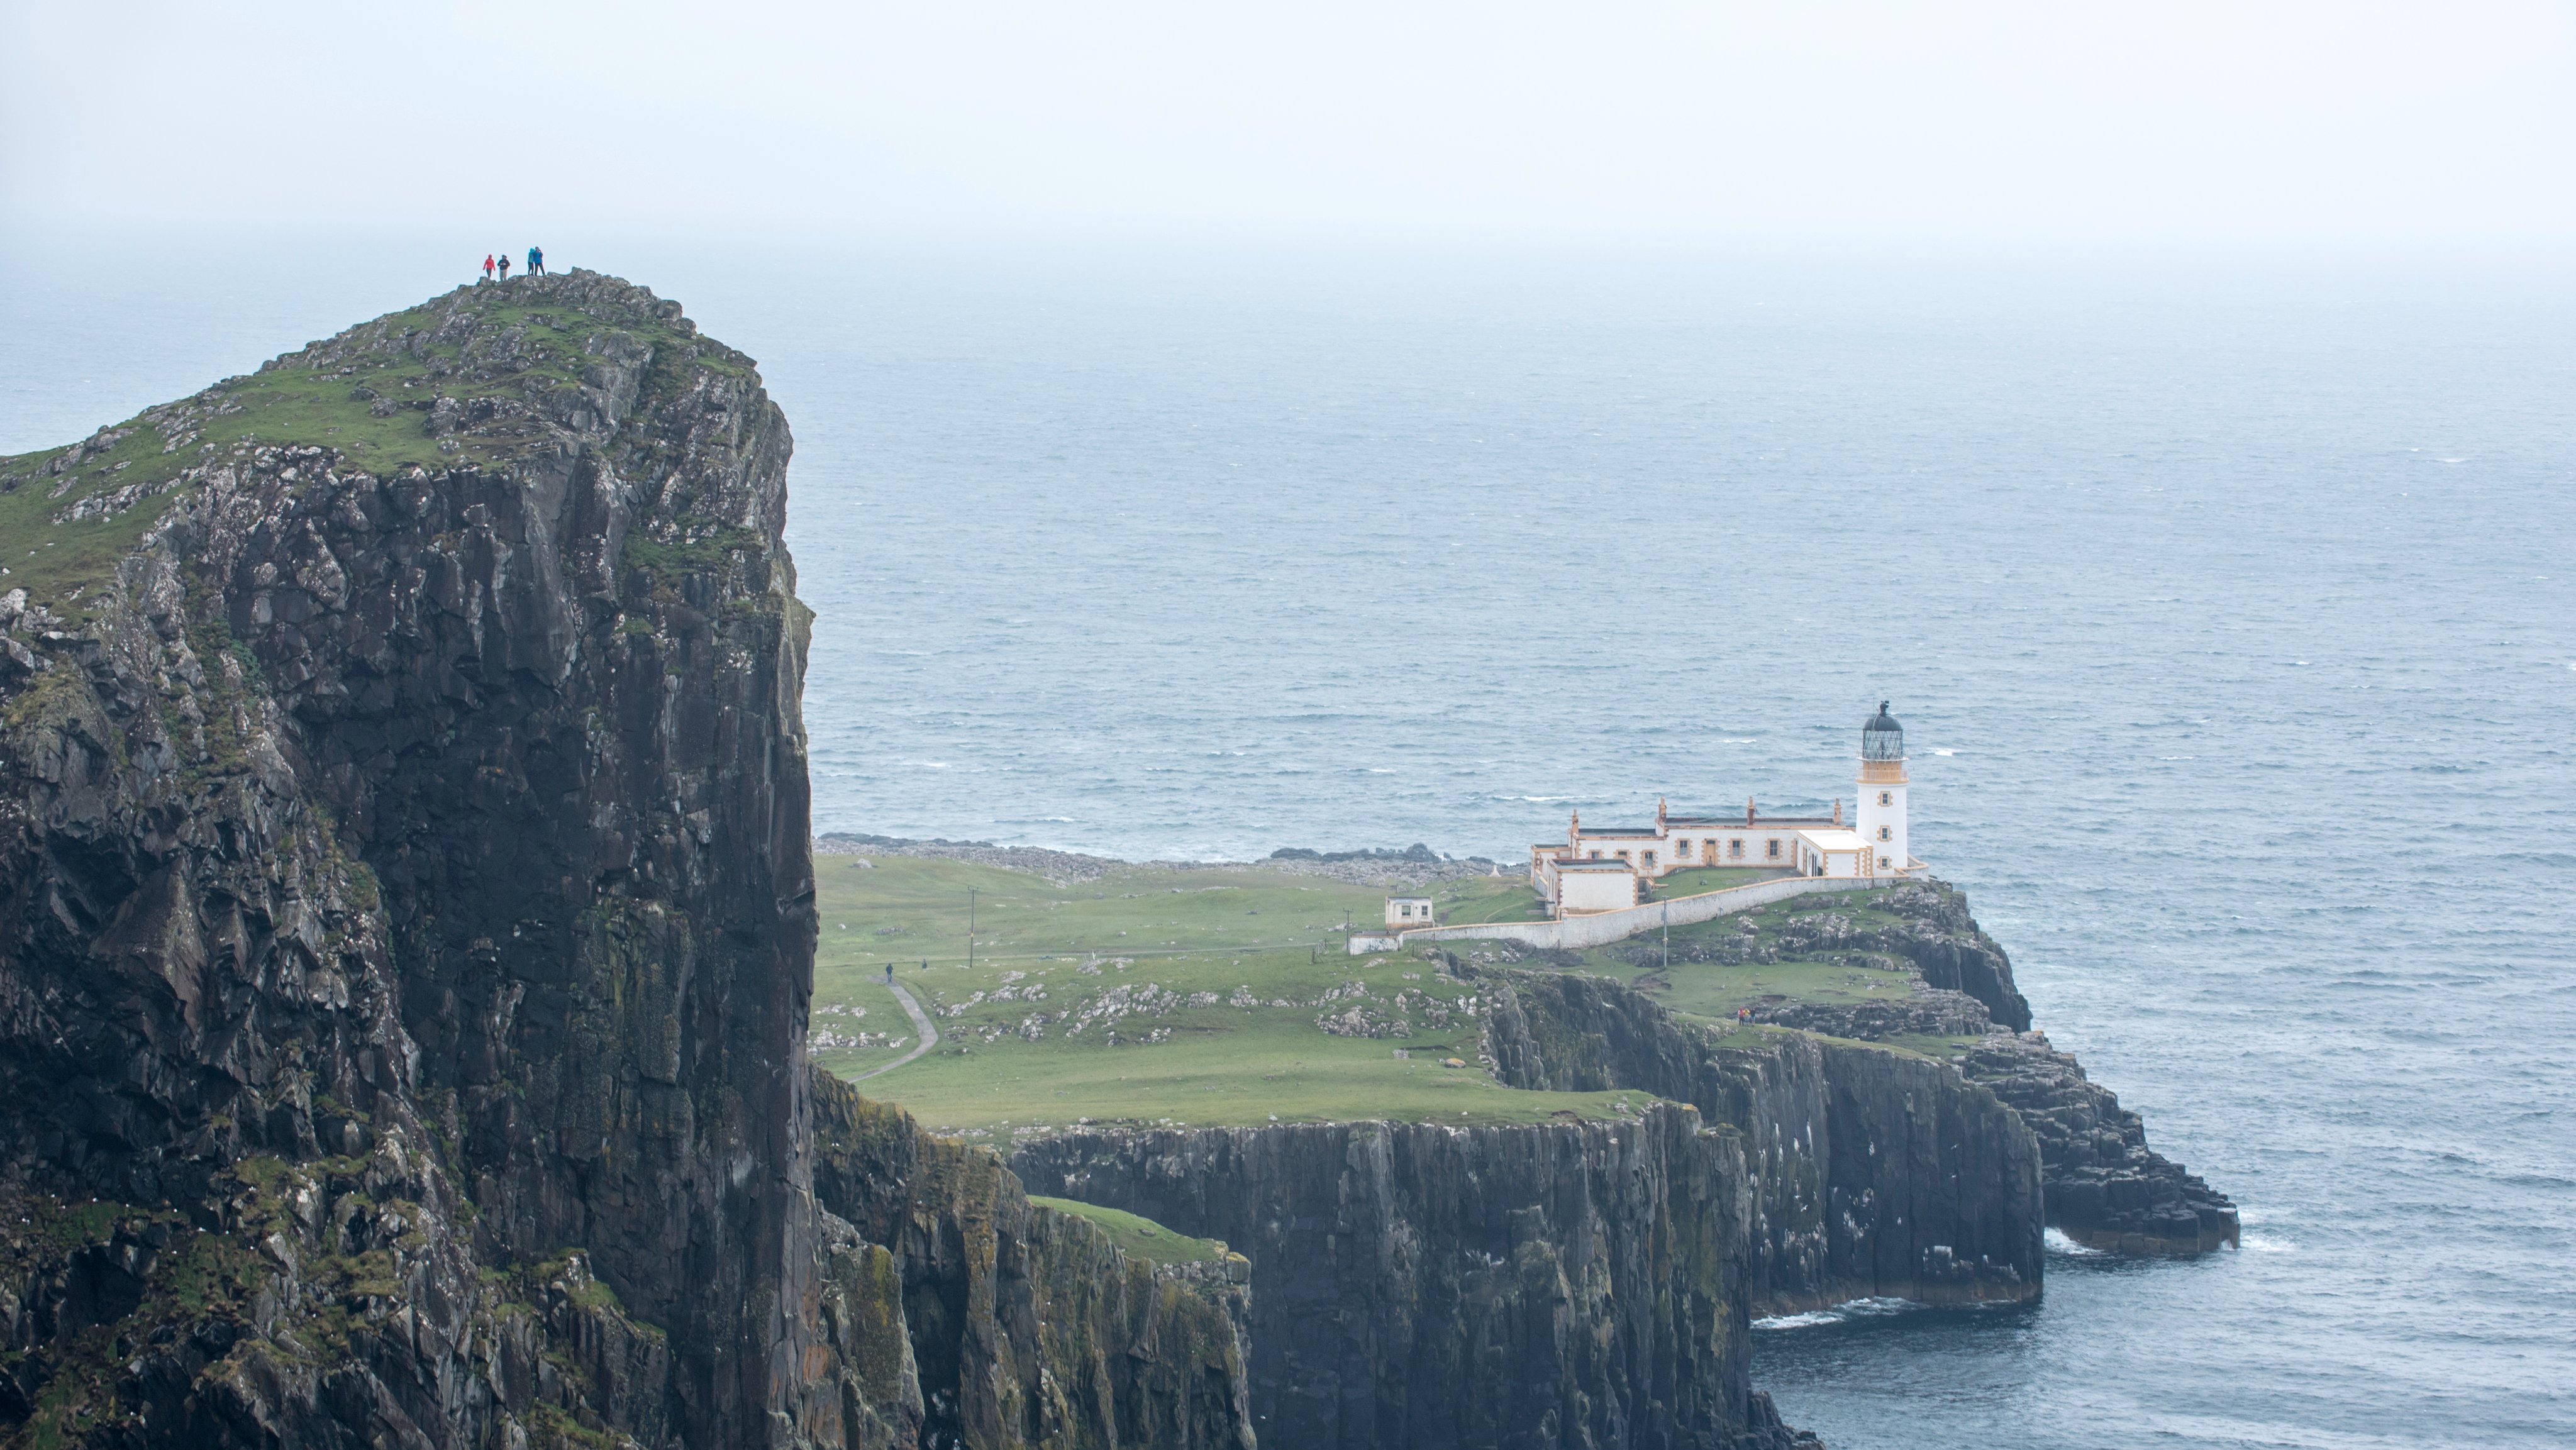 Walkers on clifftop watching Neist Point Lighthouse.